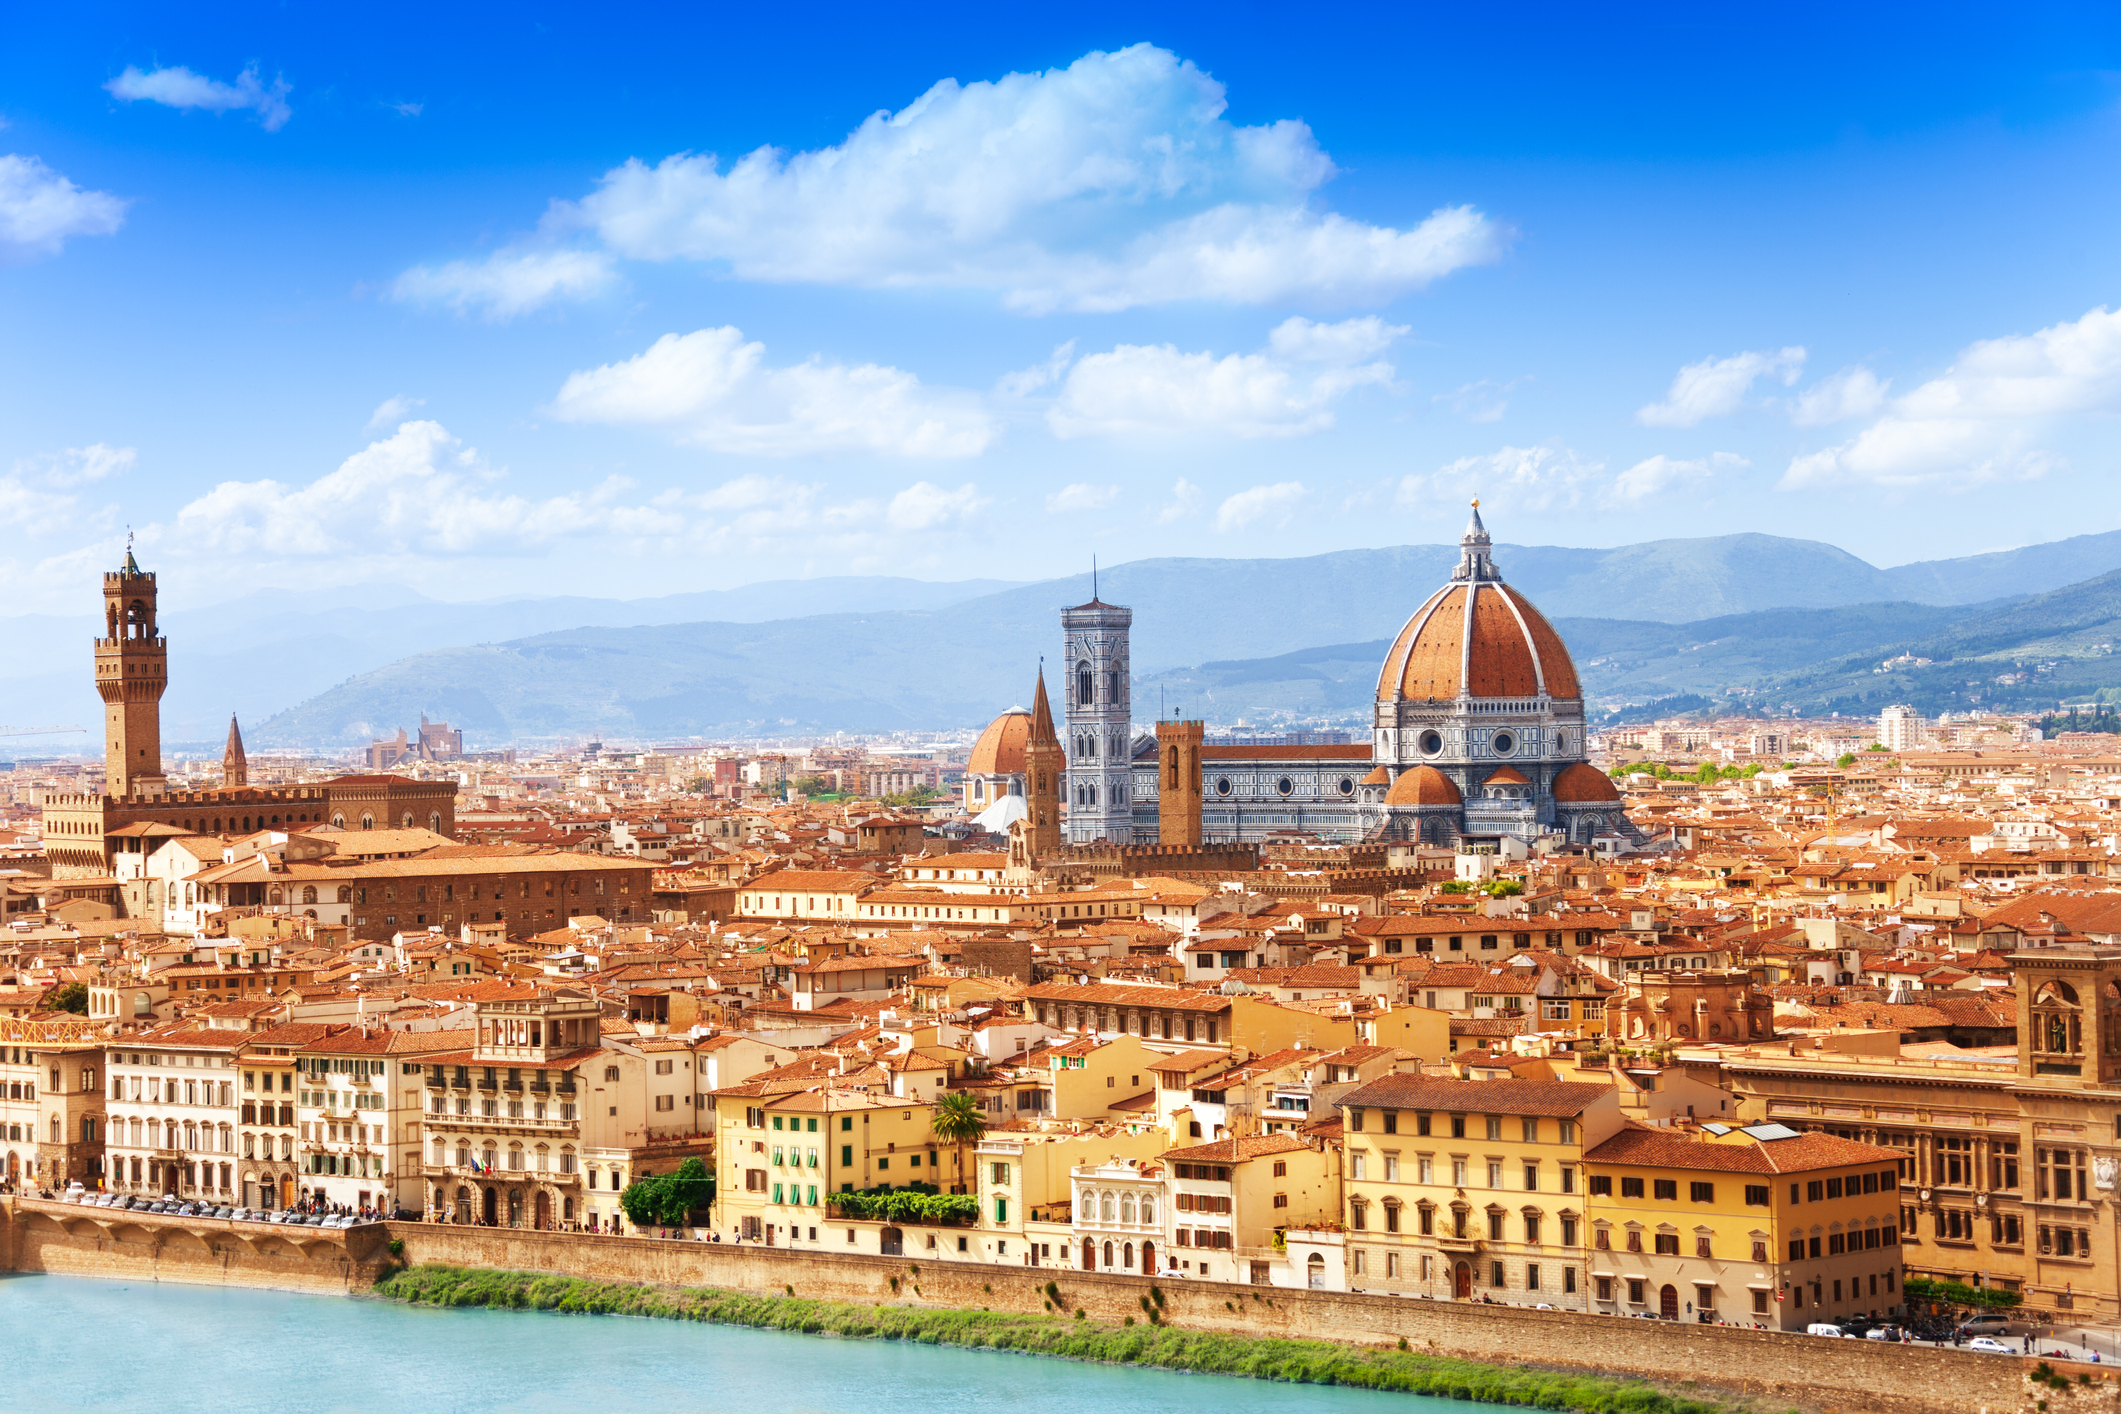 A panorama of the Arno River and cathedrals of Florence